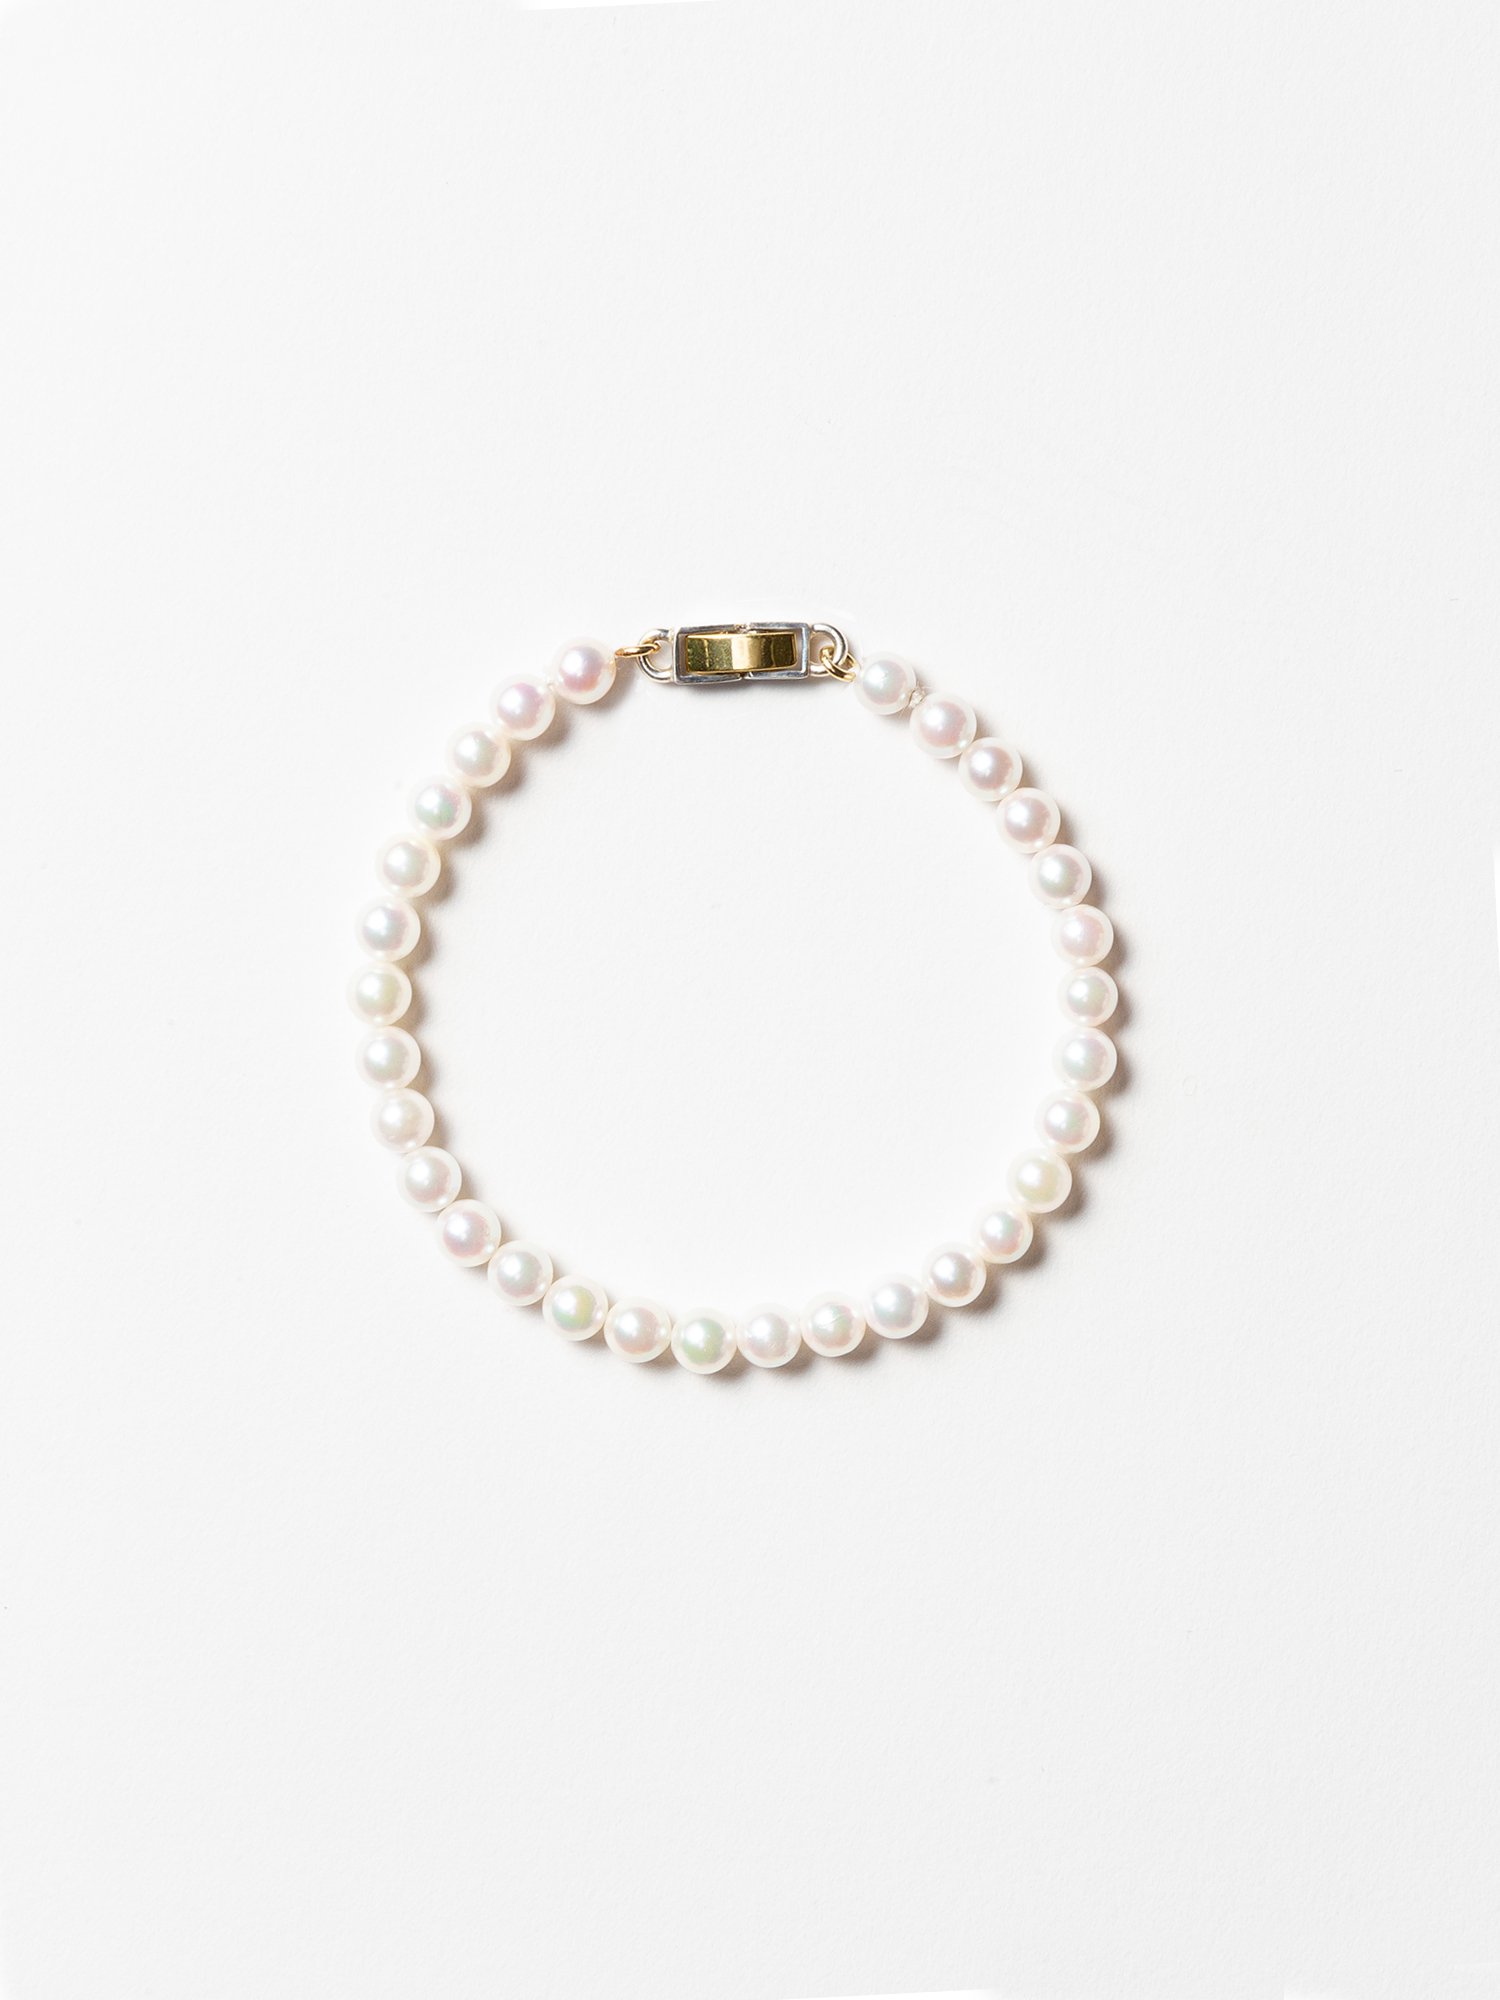 ARTEMIS /  baby pearl necklace